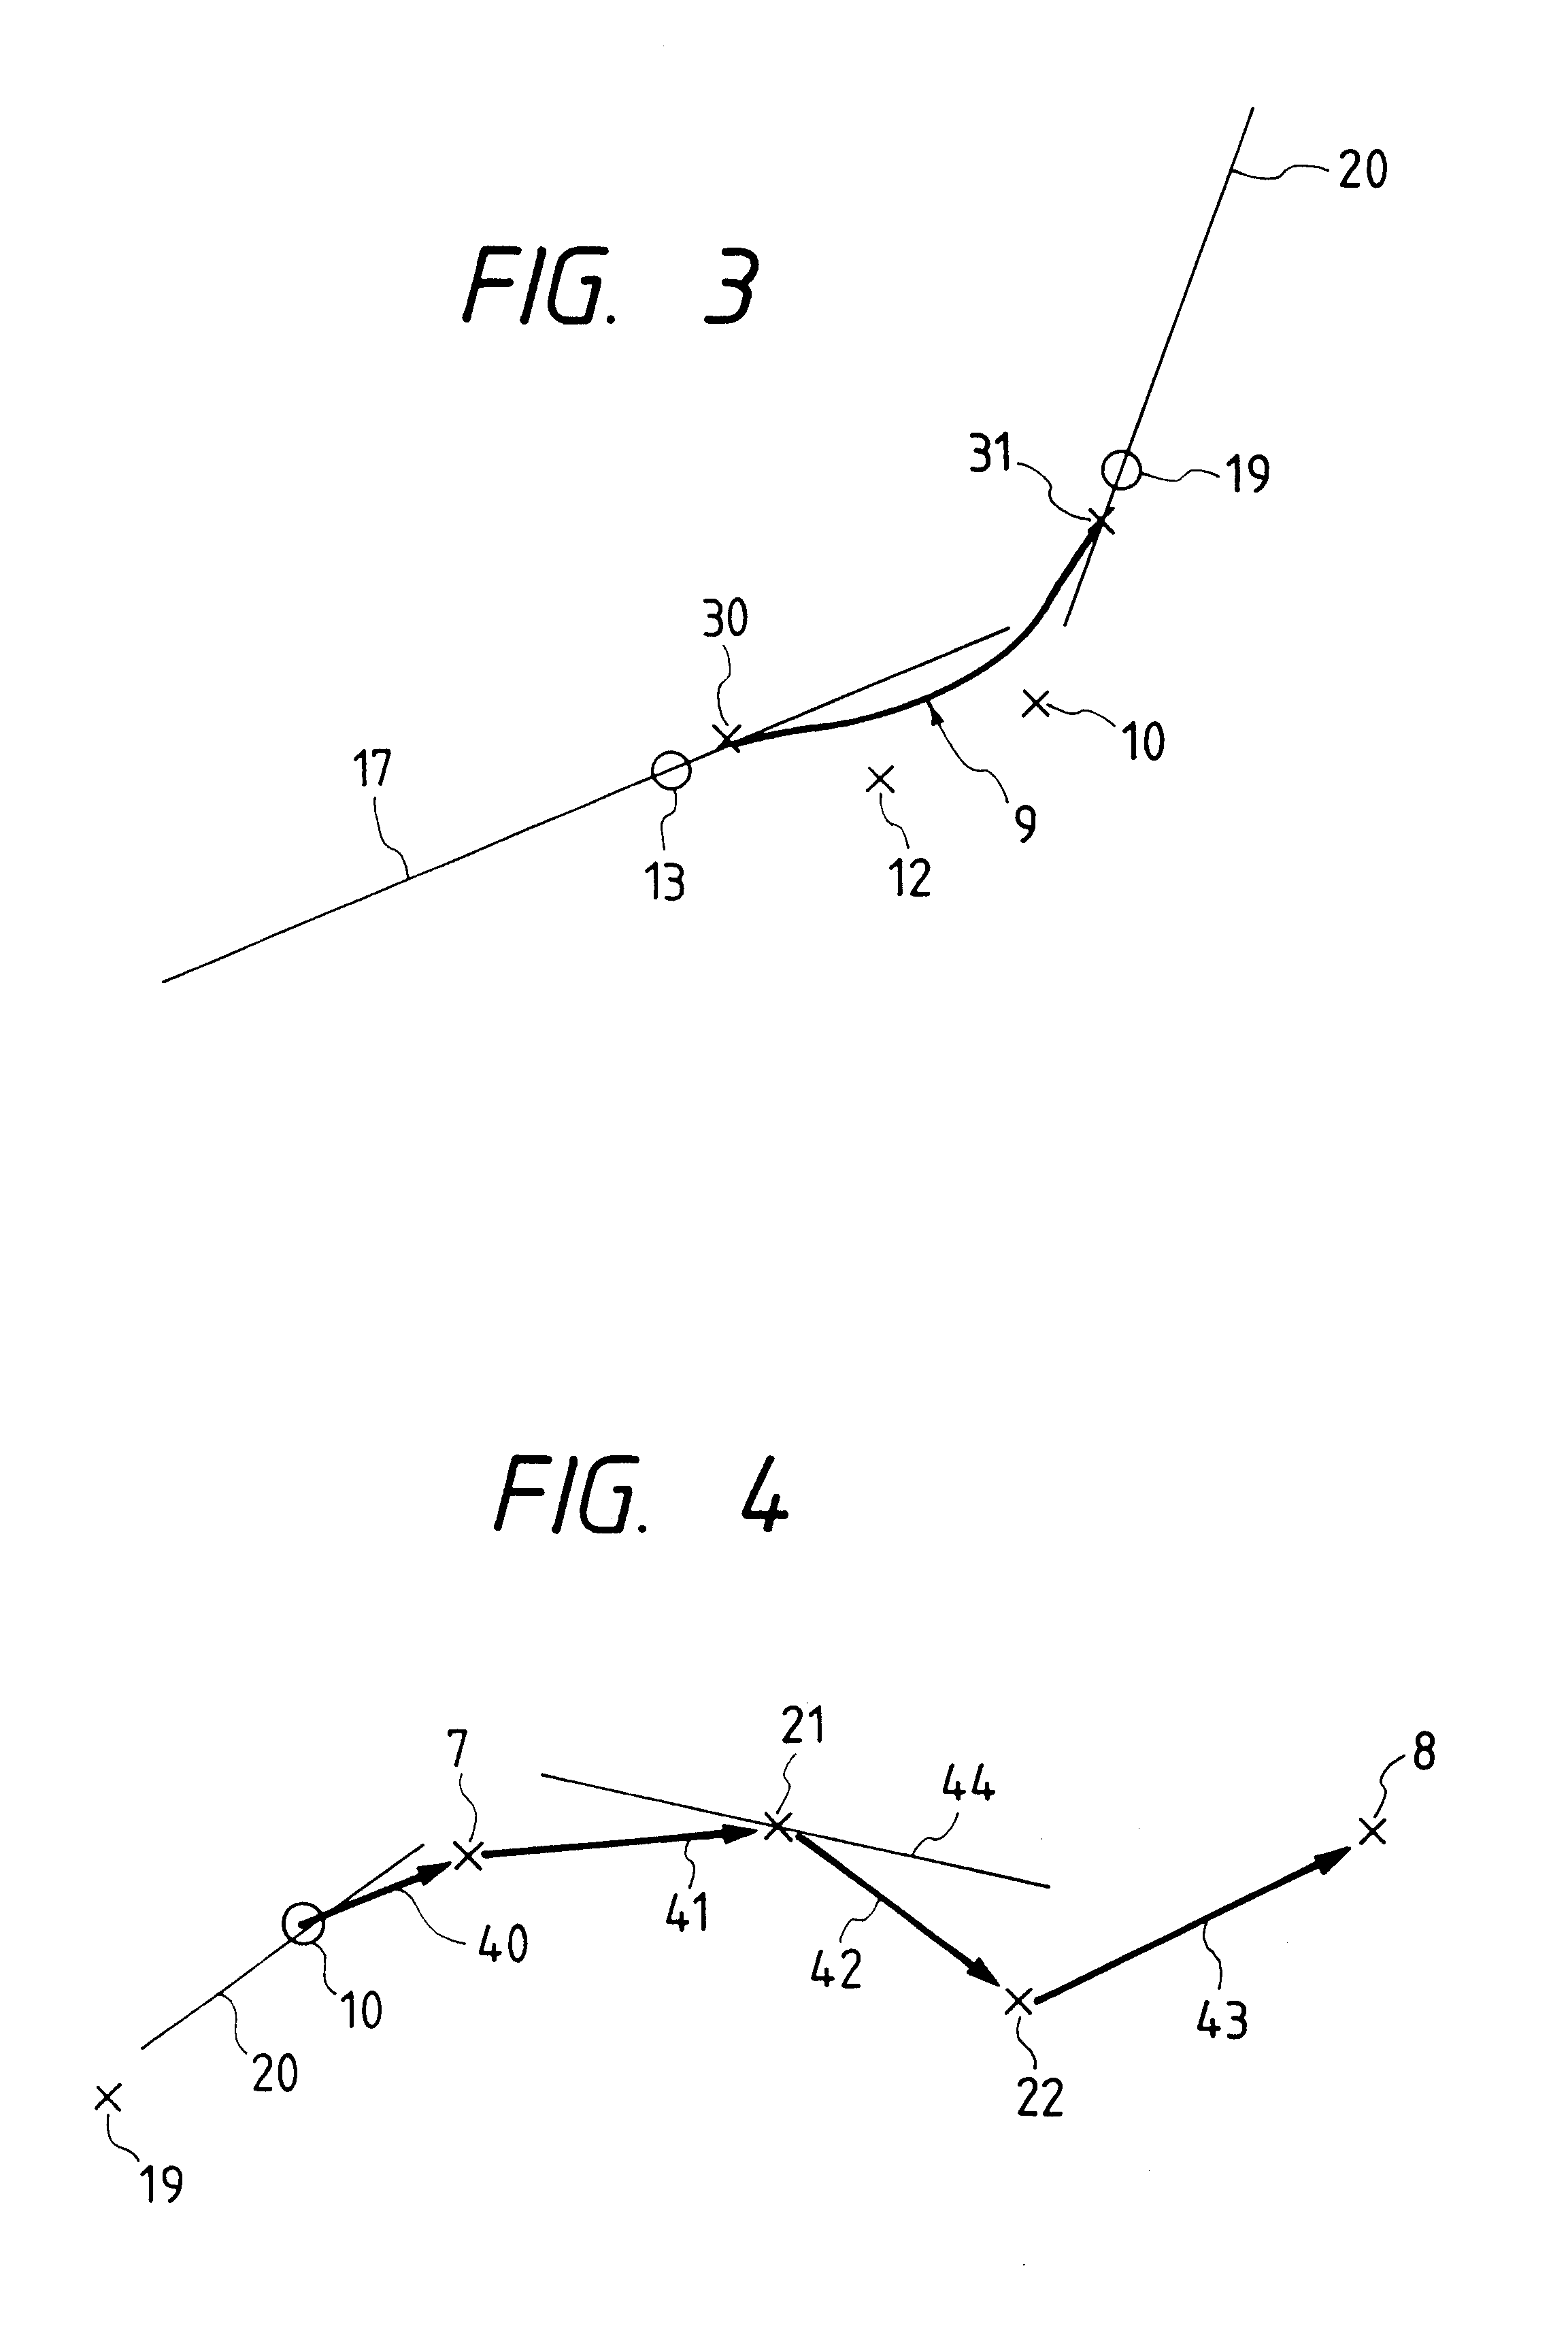 Coordinate input device and method having first and second sampling devices which sample input data at staggered intervals